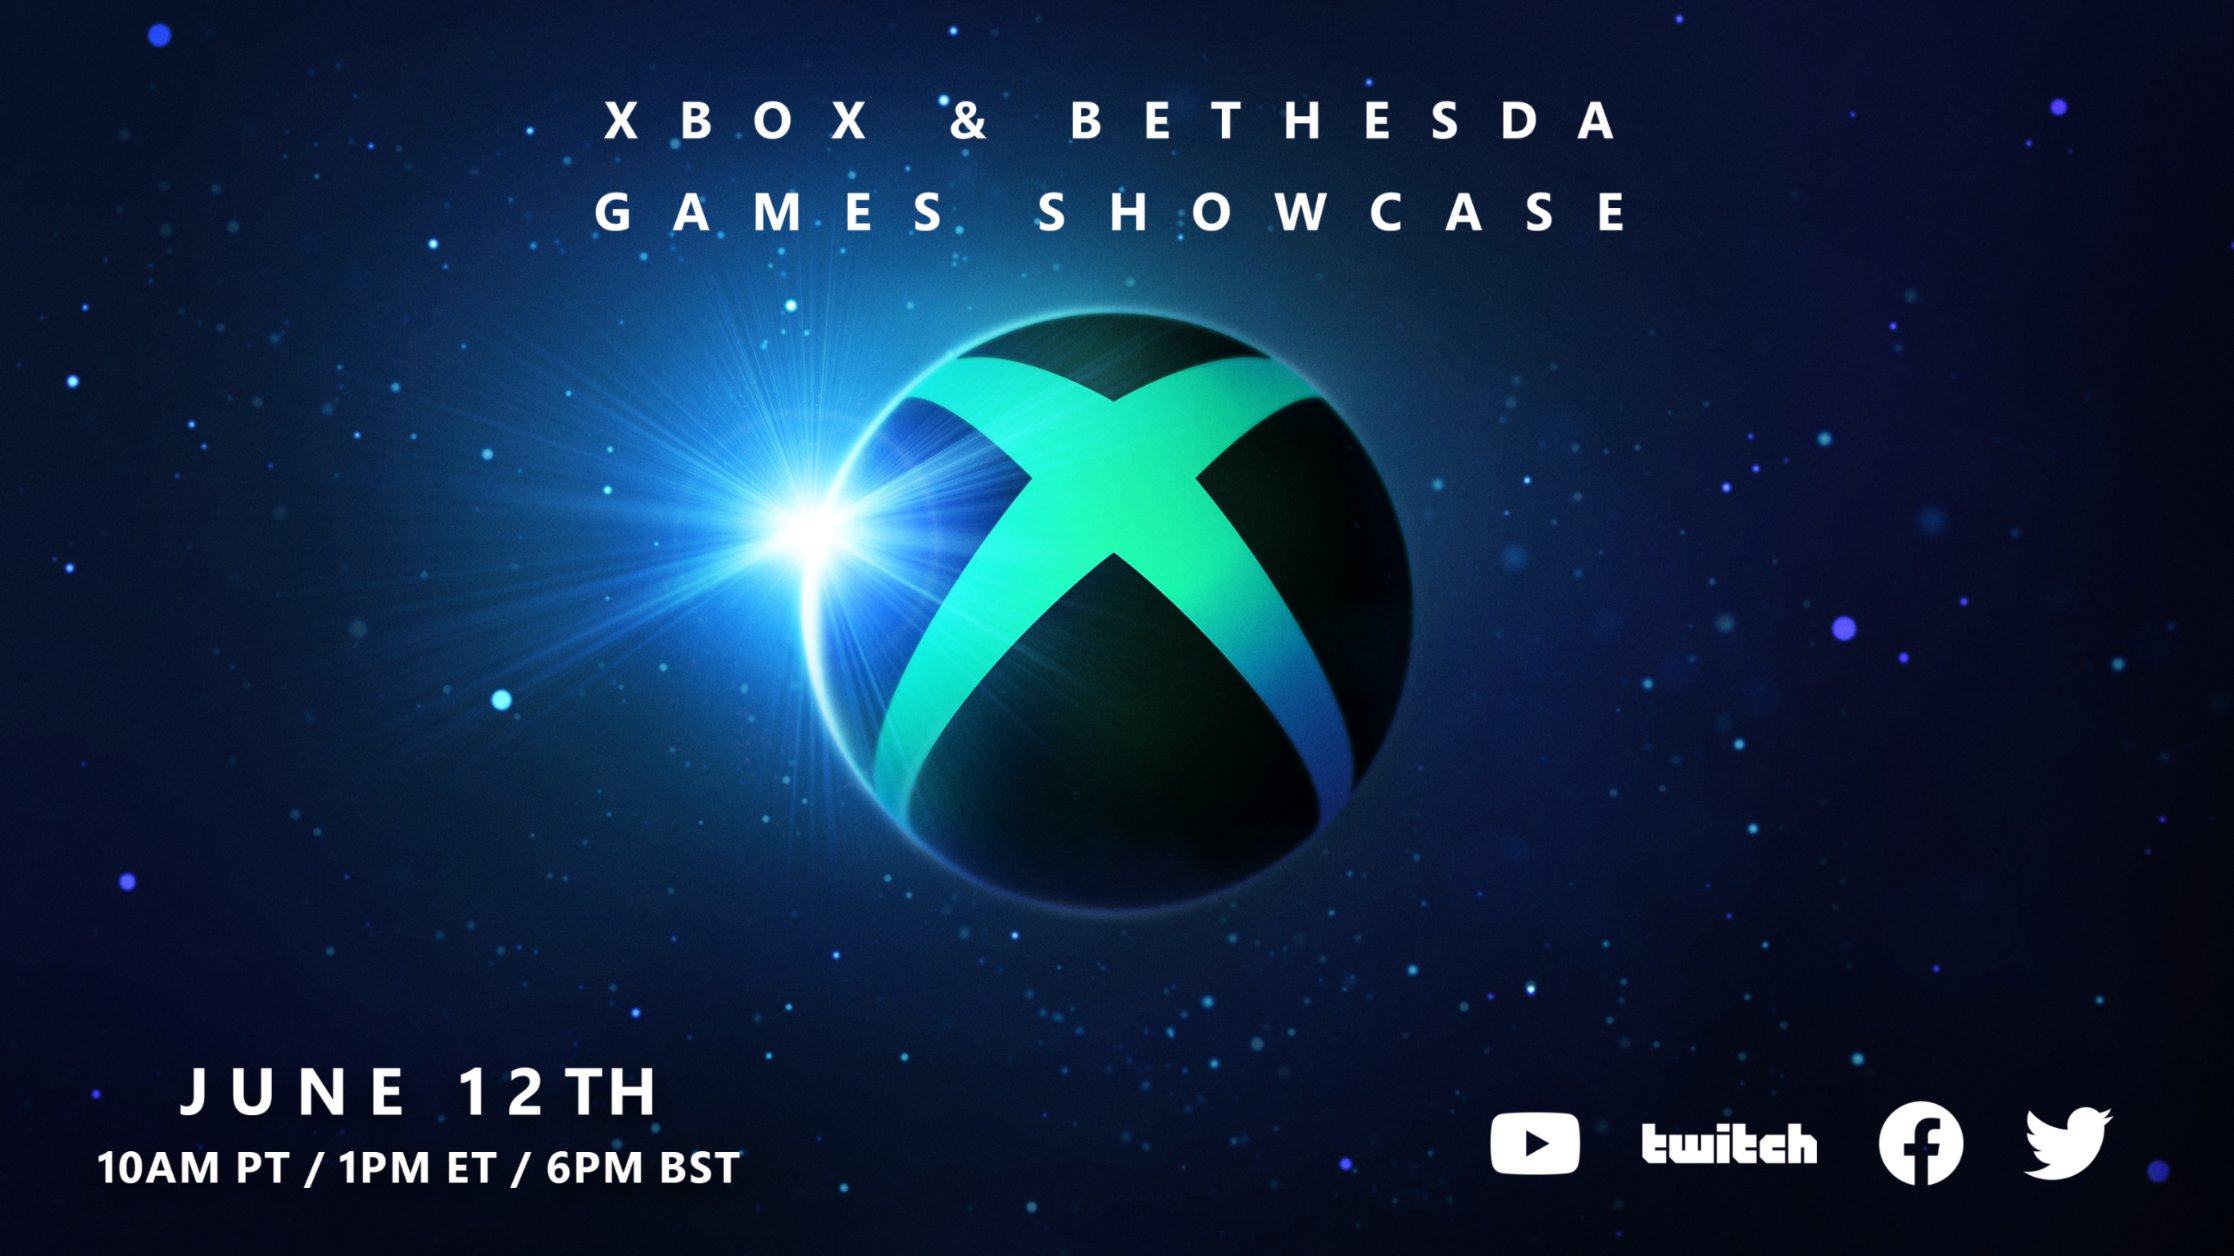 Artwork with the text "Xbox & Bethesda Games Showcase" displayed above the Xbox logo. The bottom of the image includes icons for social channels including YouTube, Twitch, Facebook, and Twitter.